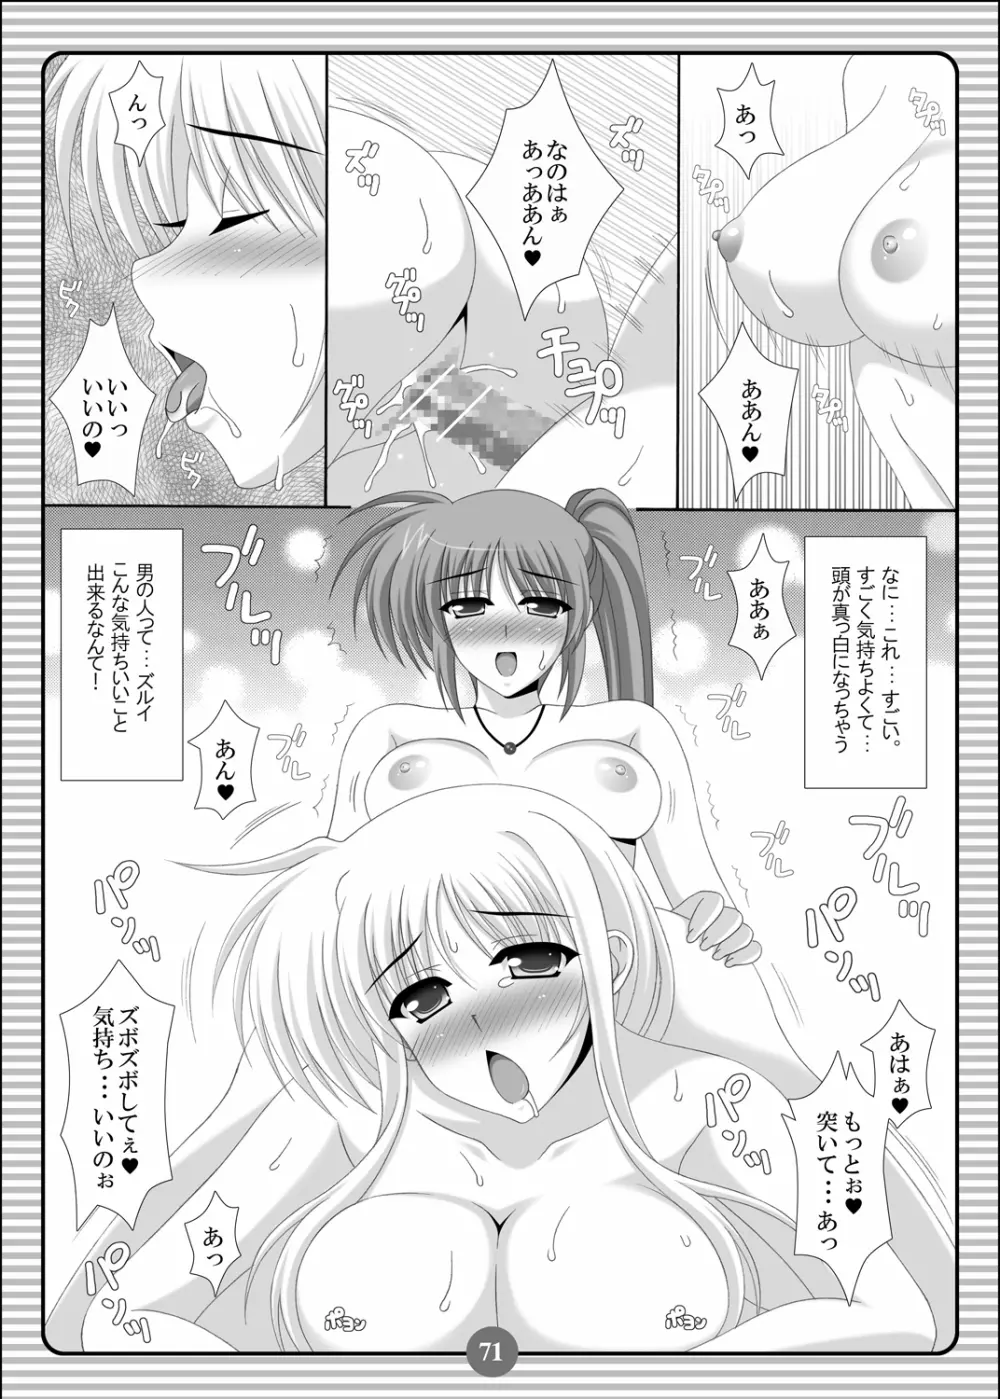 SISTER LOVER COMPLETE VOL.2 70ページ